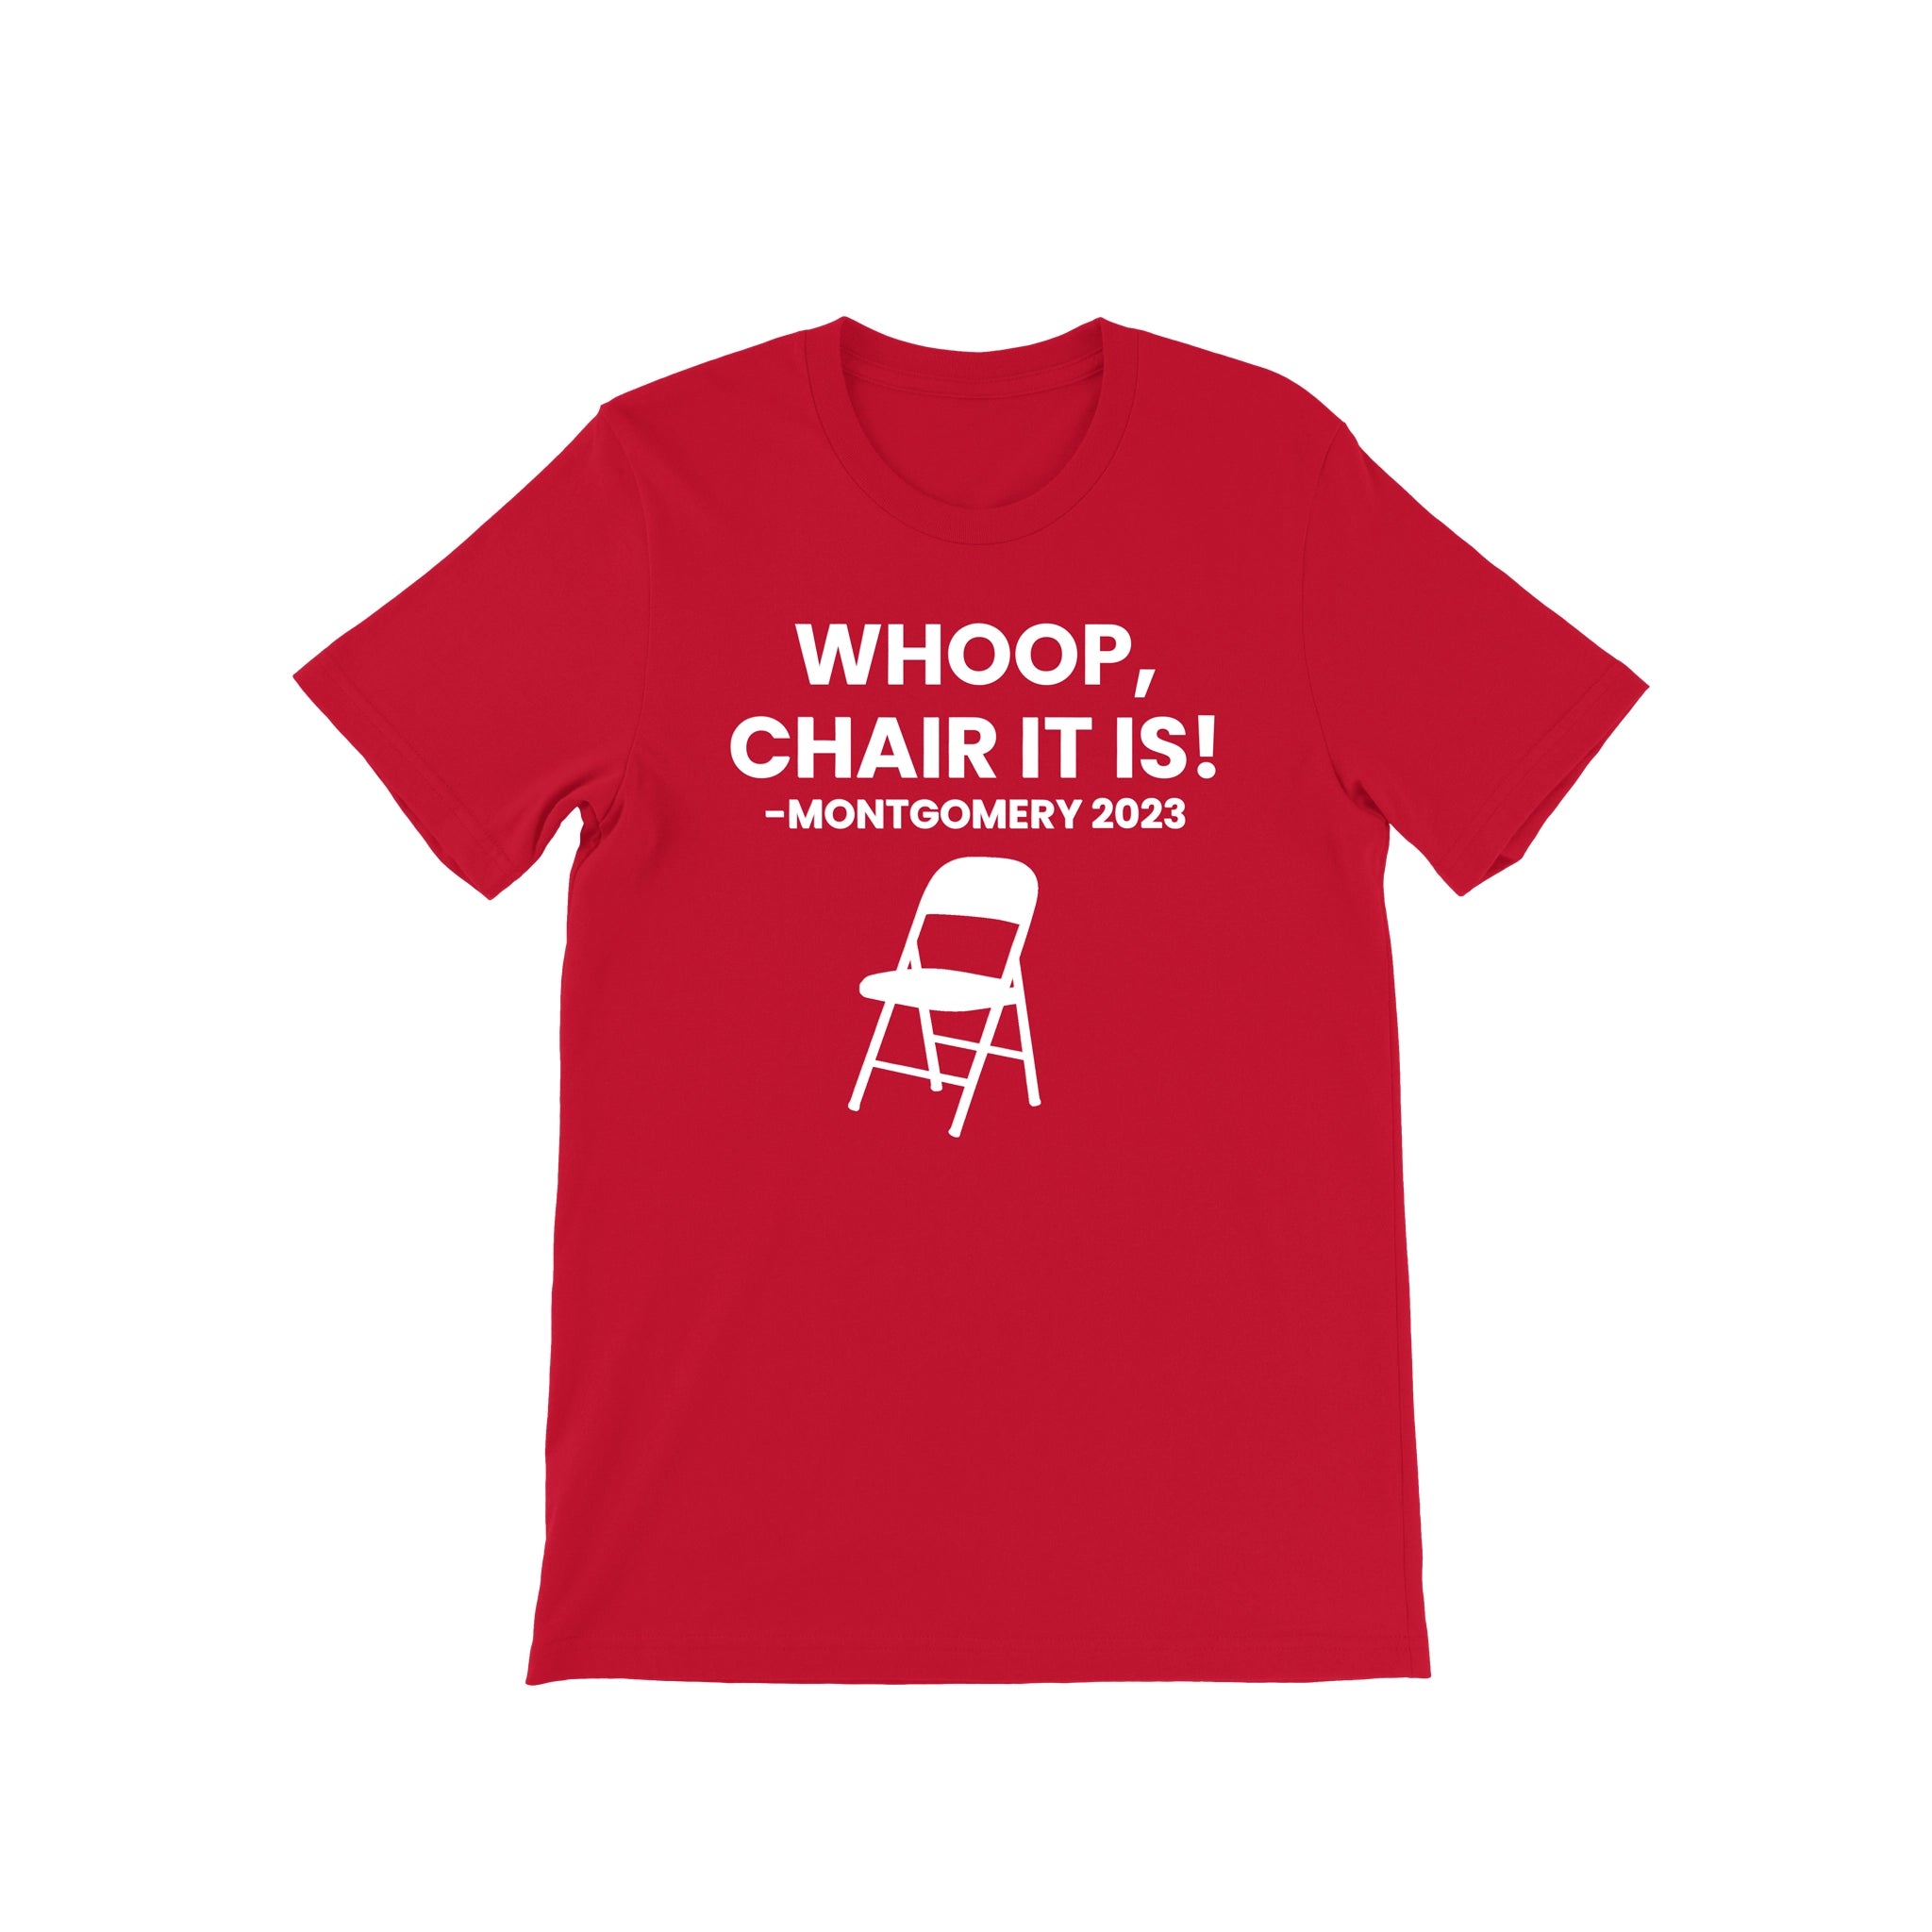 Whoop, Chair It Is Tee Red & White - Diva Starr Boutique